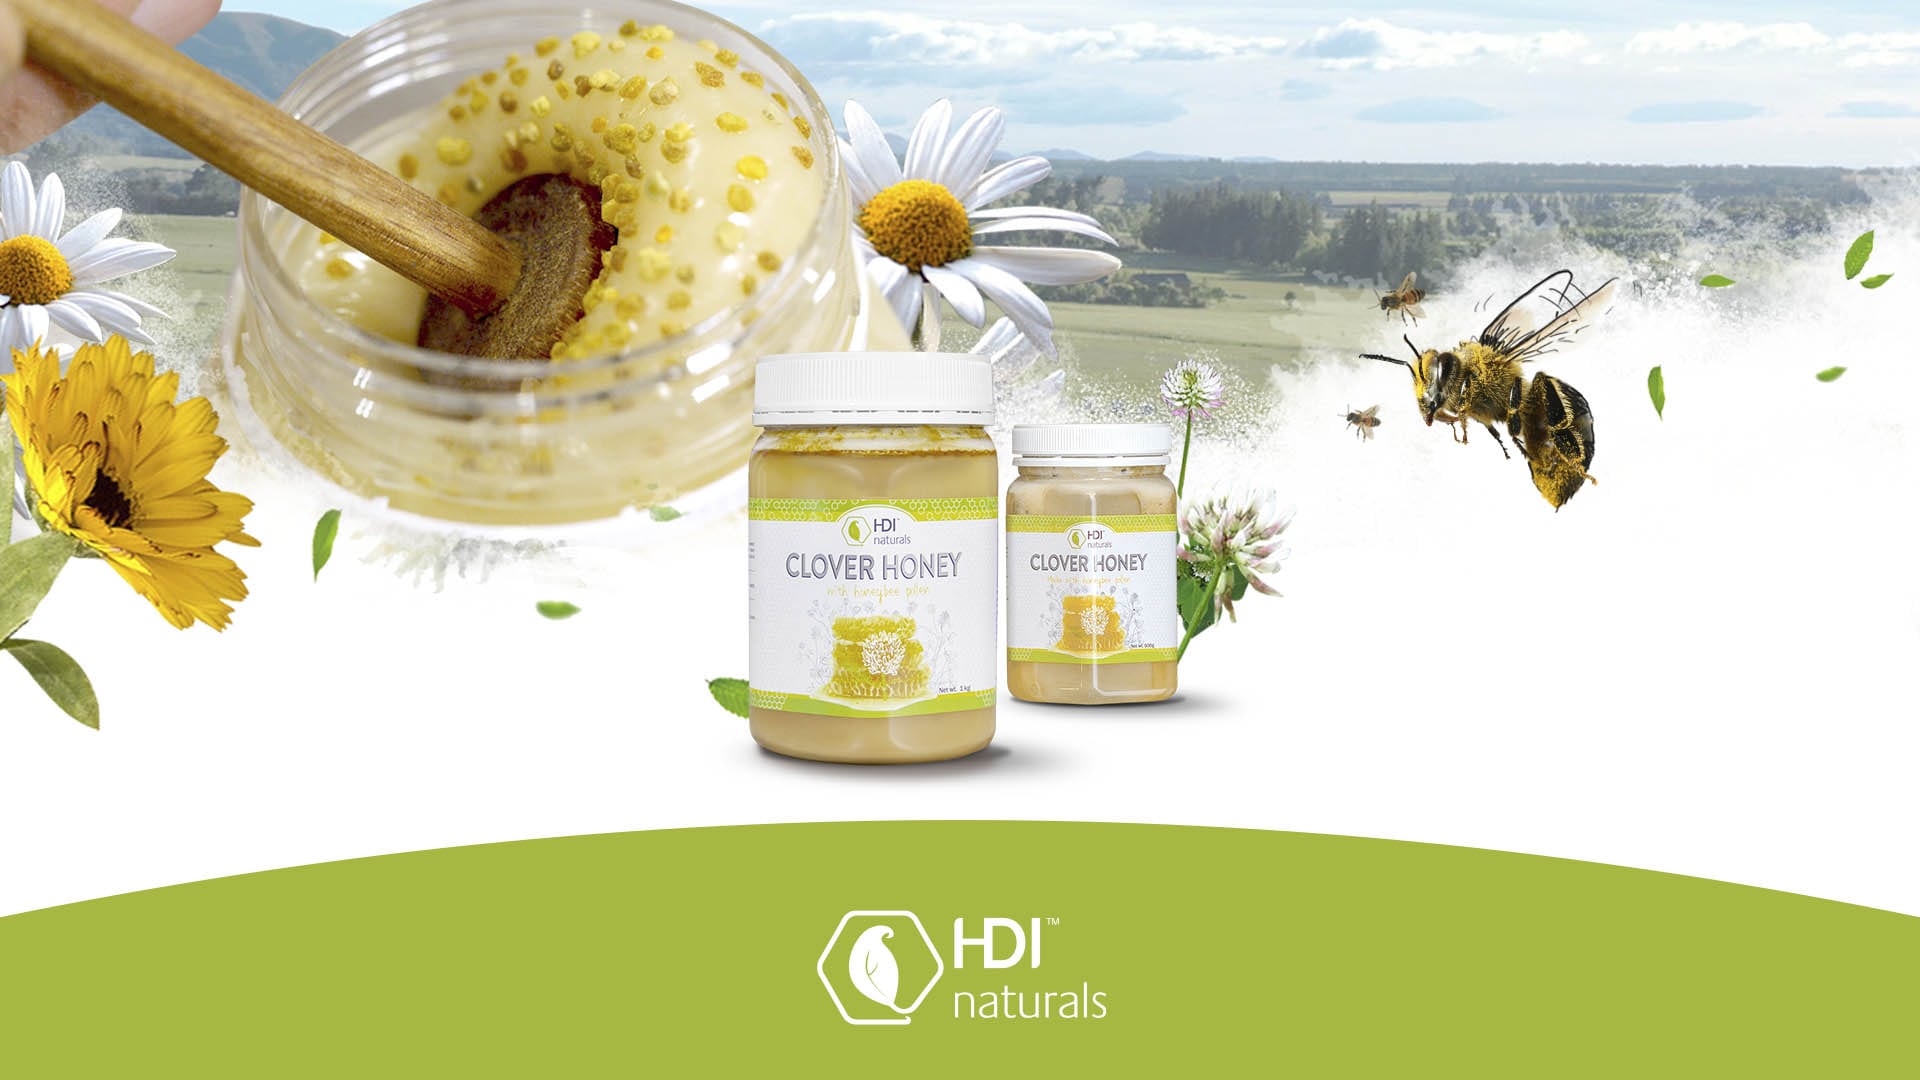 HDI CLOVER HONEY IS OFFICIALLY A LOW GI FOOD, SAFE for Diabetics